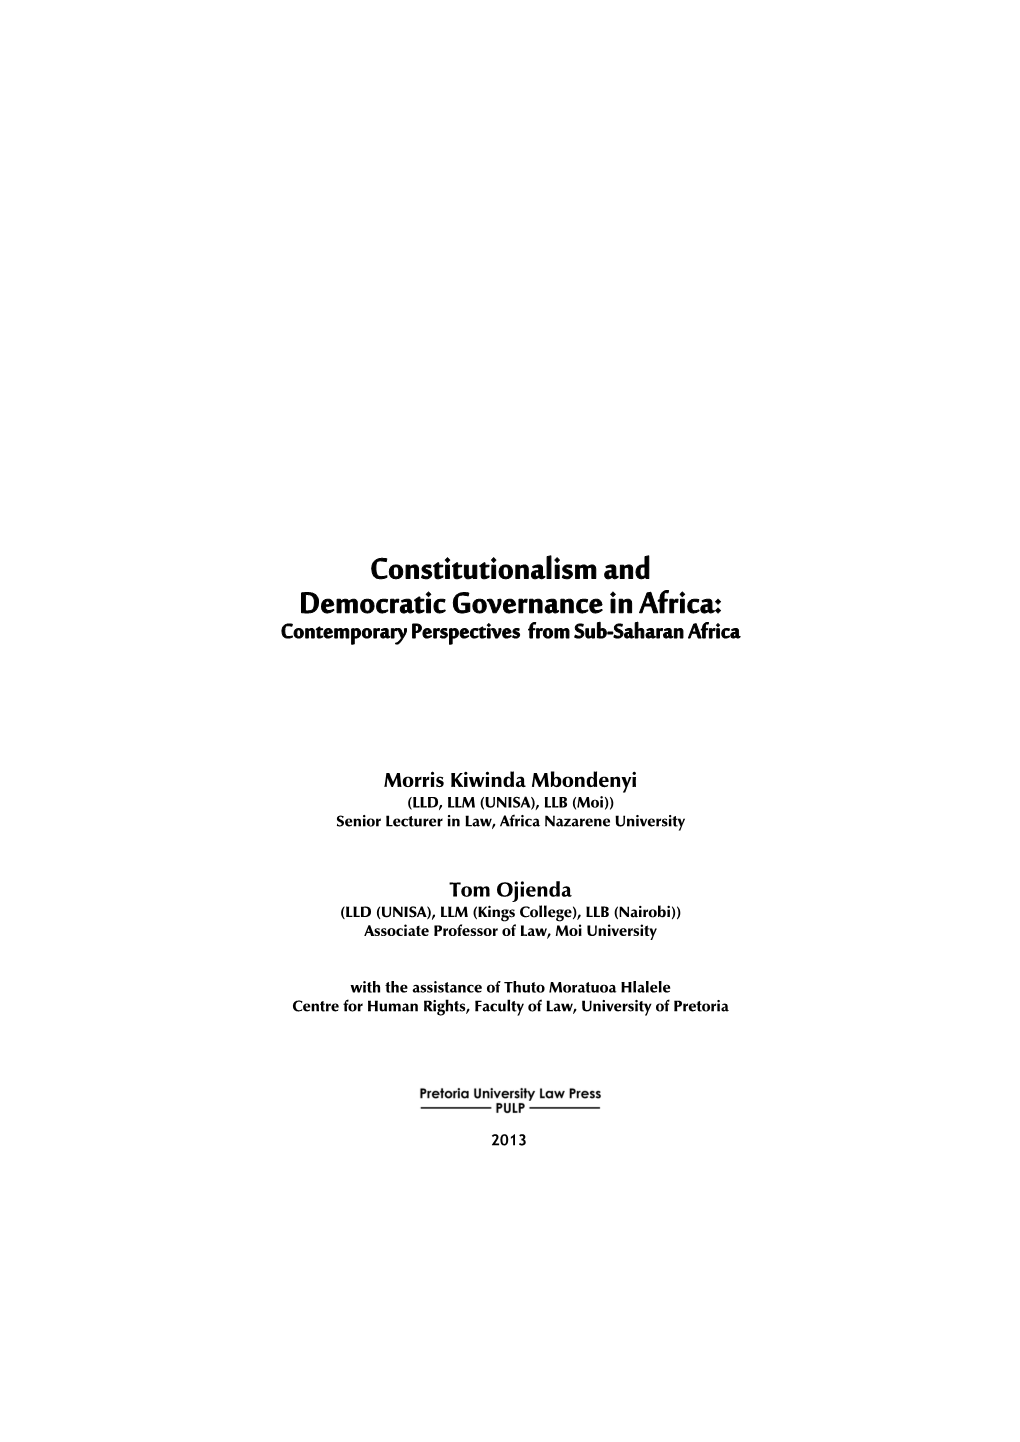 Constitutionalism and Democratic Governance in Africa: Contemporary Perspectives from Sub-Saharan Africa